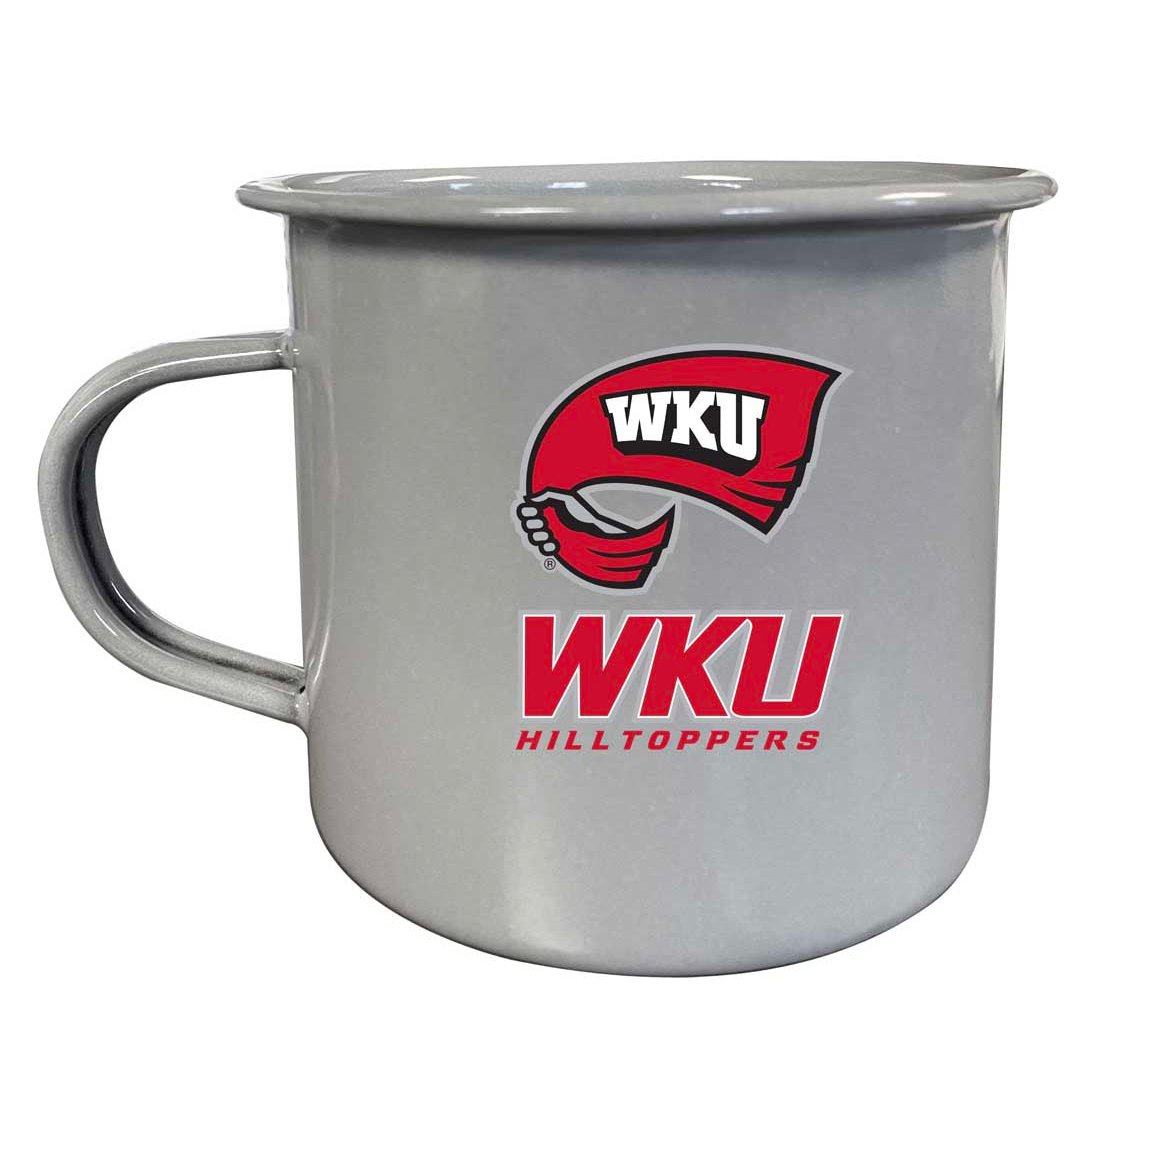 Western Kentucky Hilltoppers Tin Camper Coffee Mug - Choose Your Color - Navy